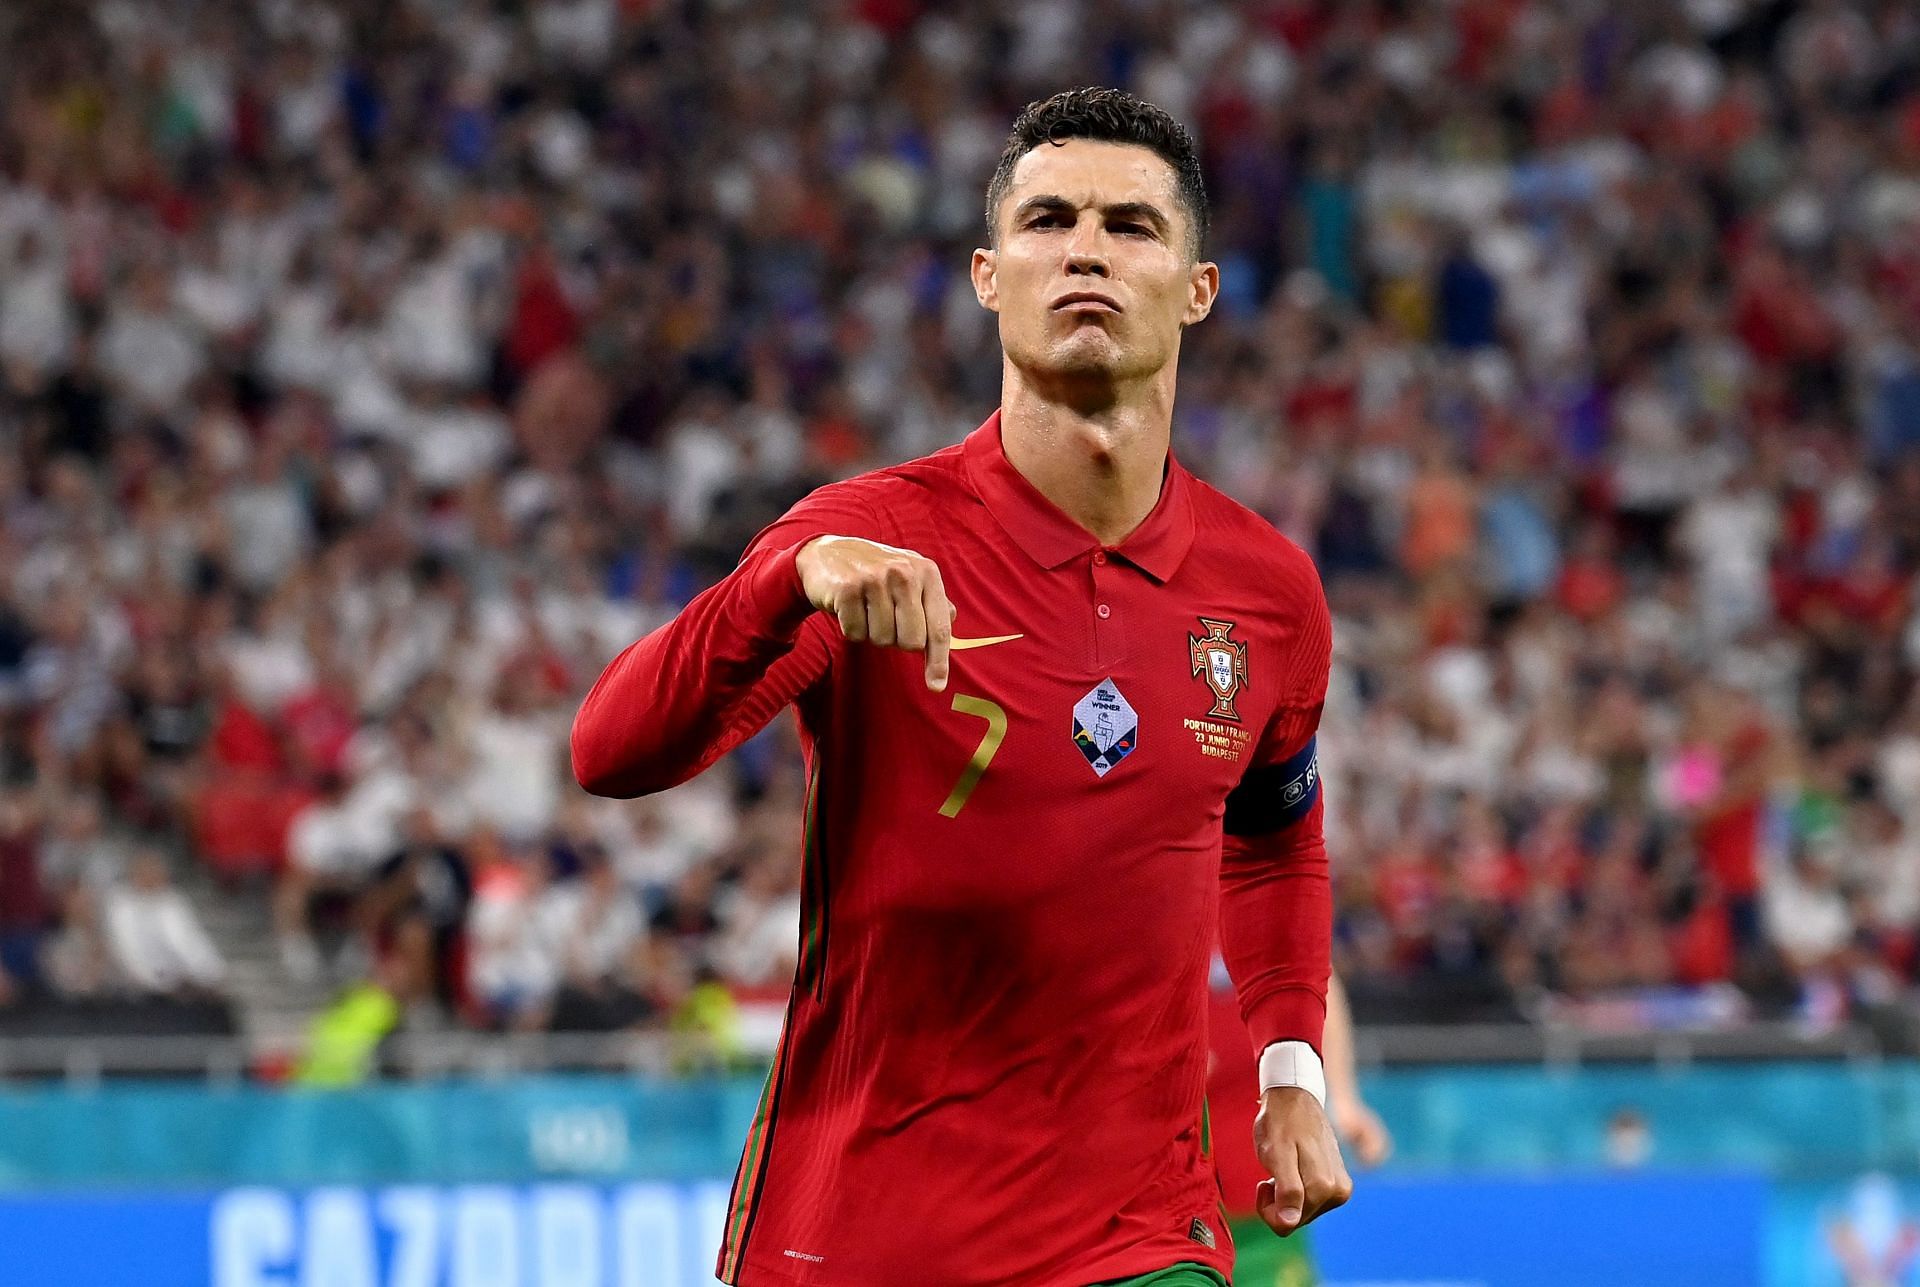 Cristiano Ronaldo has saved Portugal on multiple occasions